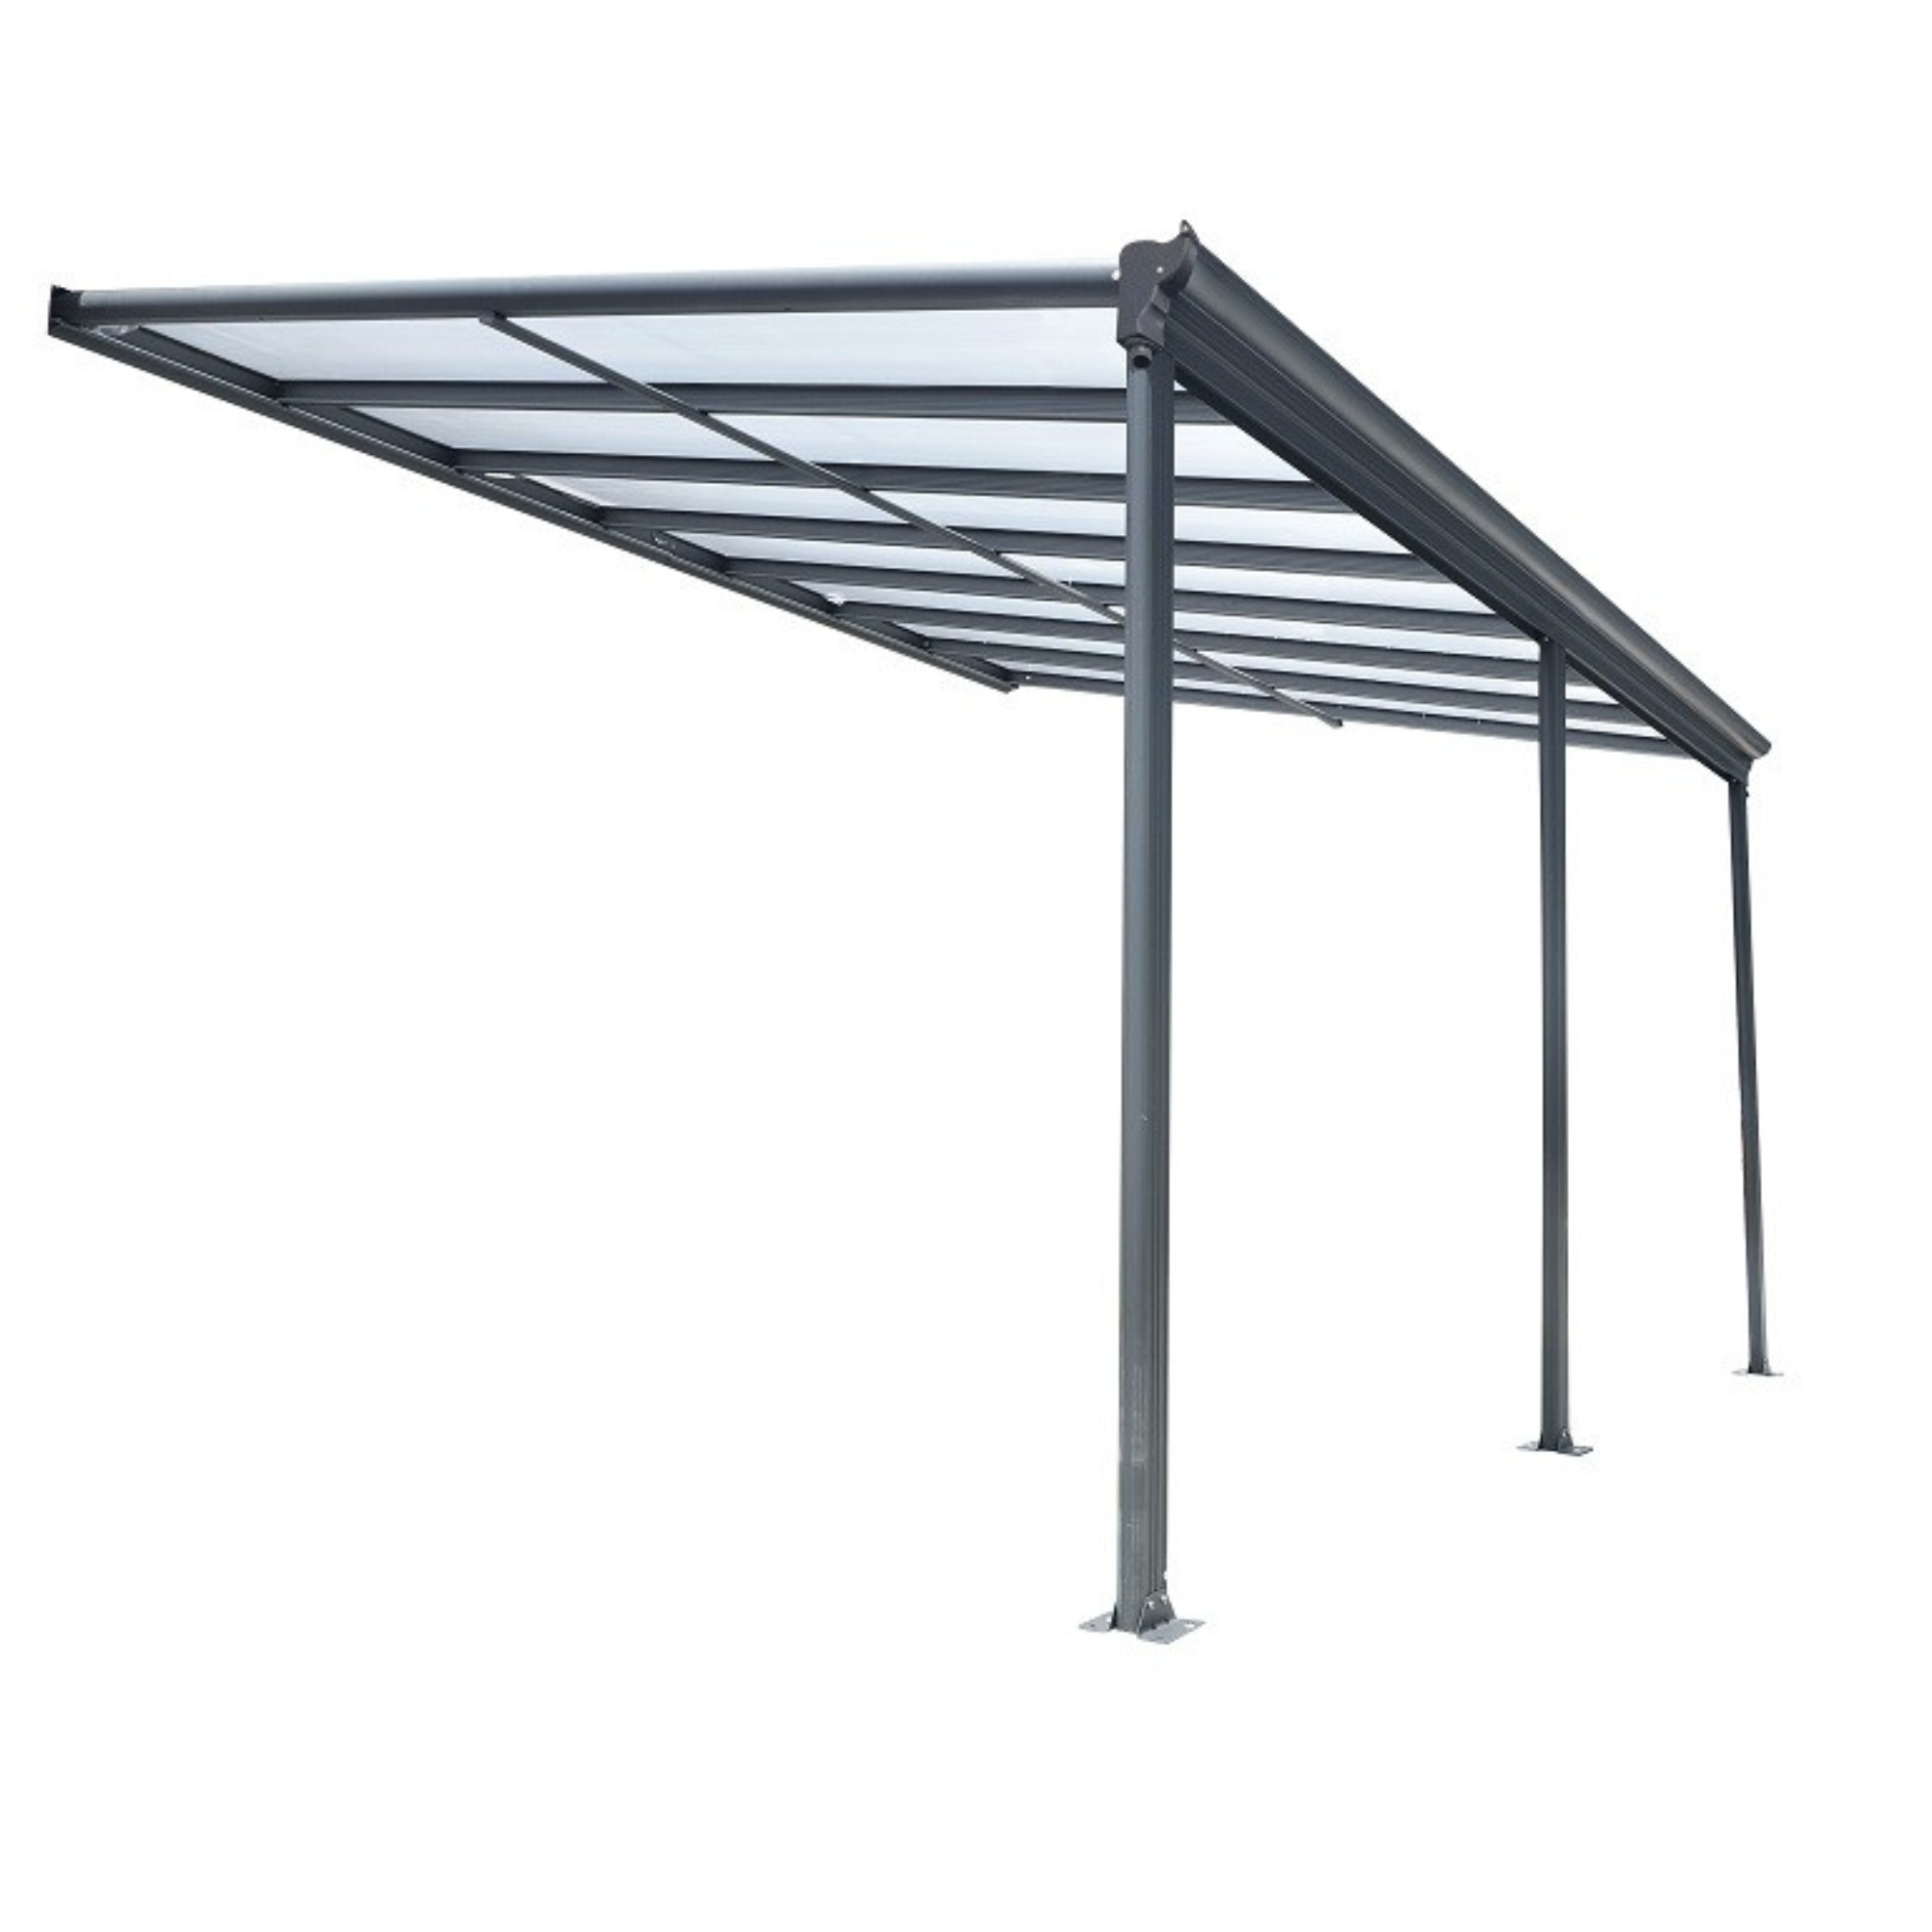 Kingston 10x14ft Wide Lean To Carport Patio Cover